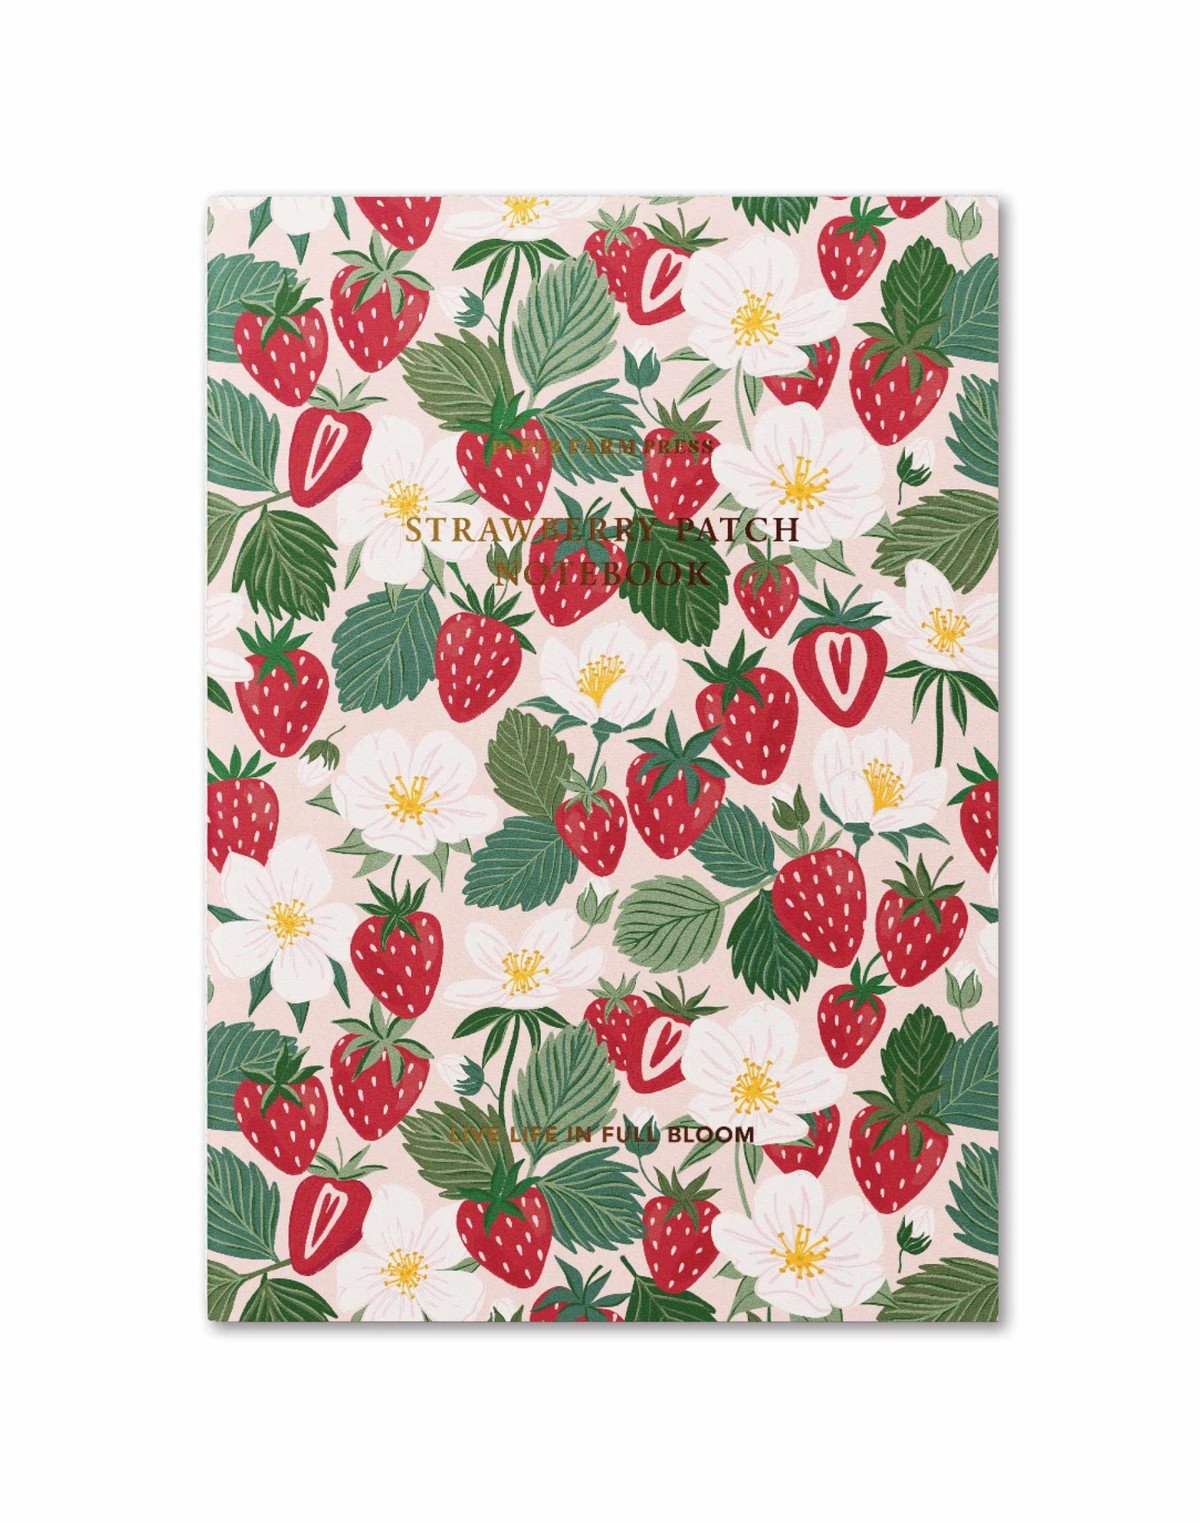 Live Life In Full Bloom Strawberry Patch Stitched Notebook item